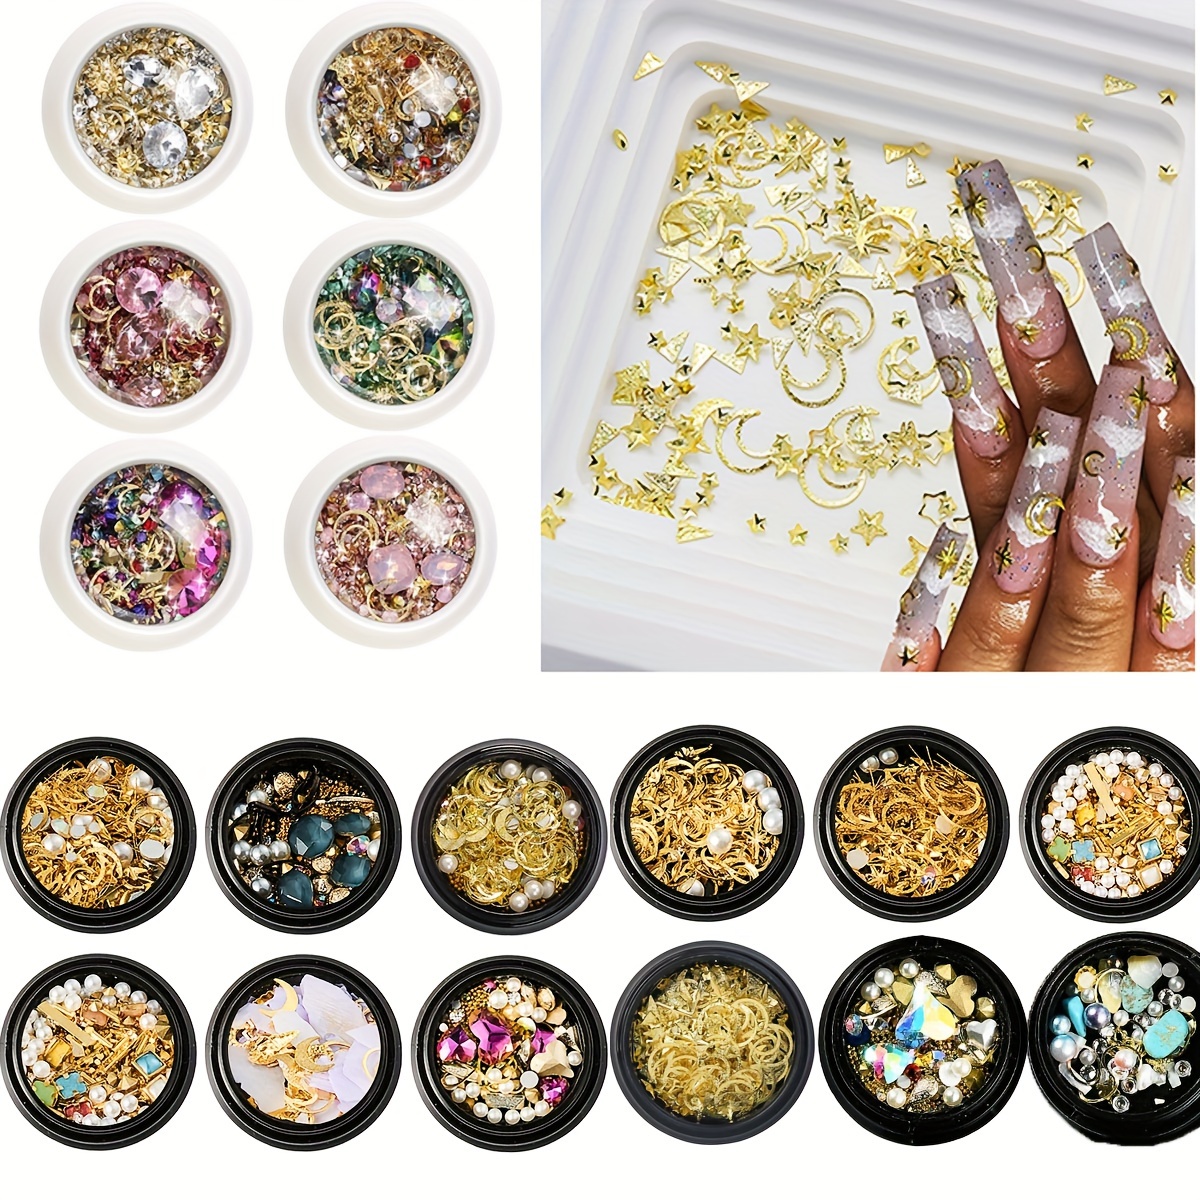 

20 Luxurious Boxes Glittering Star Moon Nail Art Charms - Premium 3d Metal Studs Withshimmering Crystals - Durable Alloy For Chic Manicures, Salon-styledecor, And Creative Nail Designs